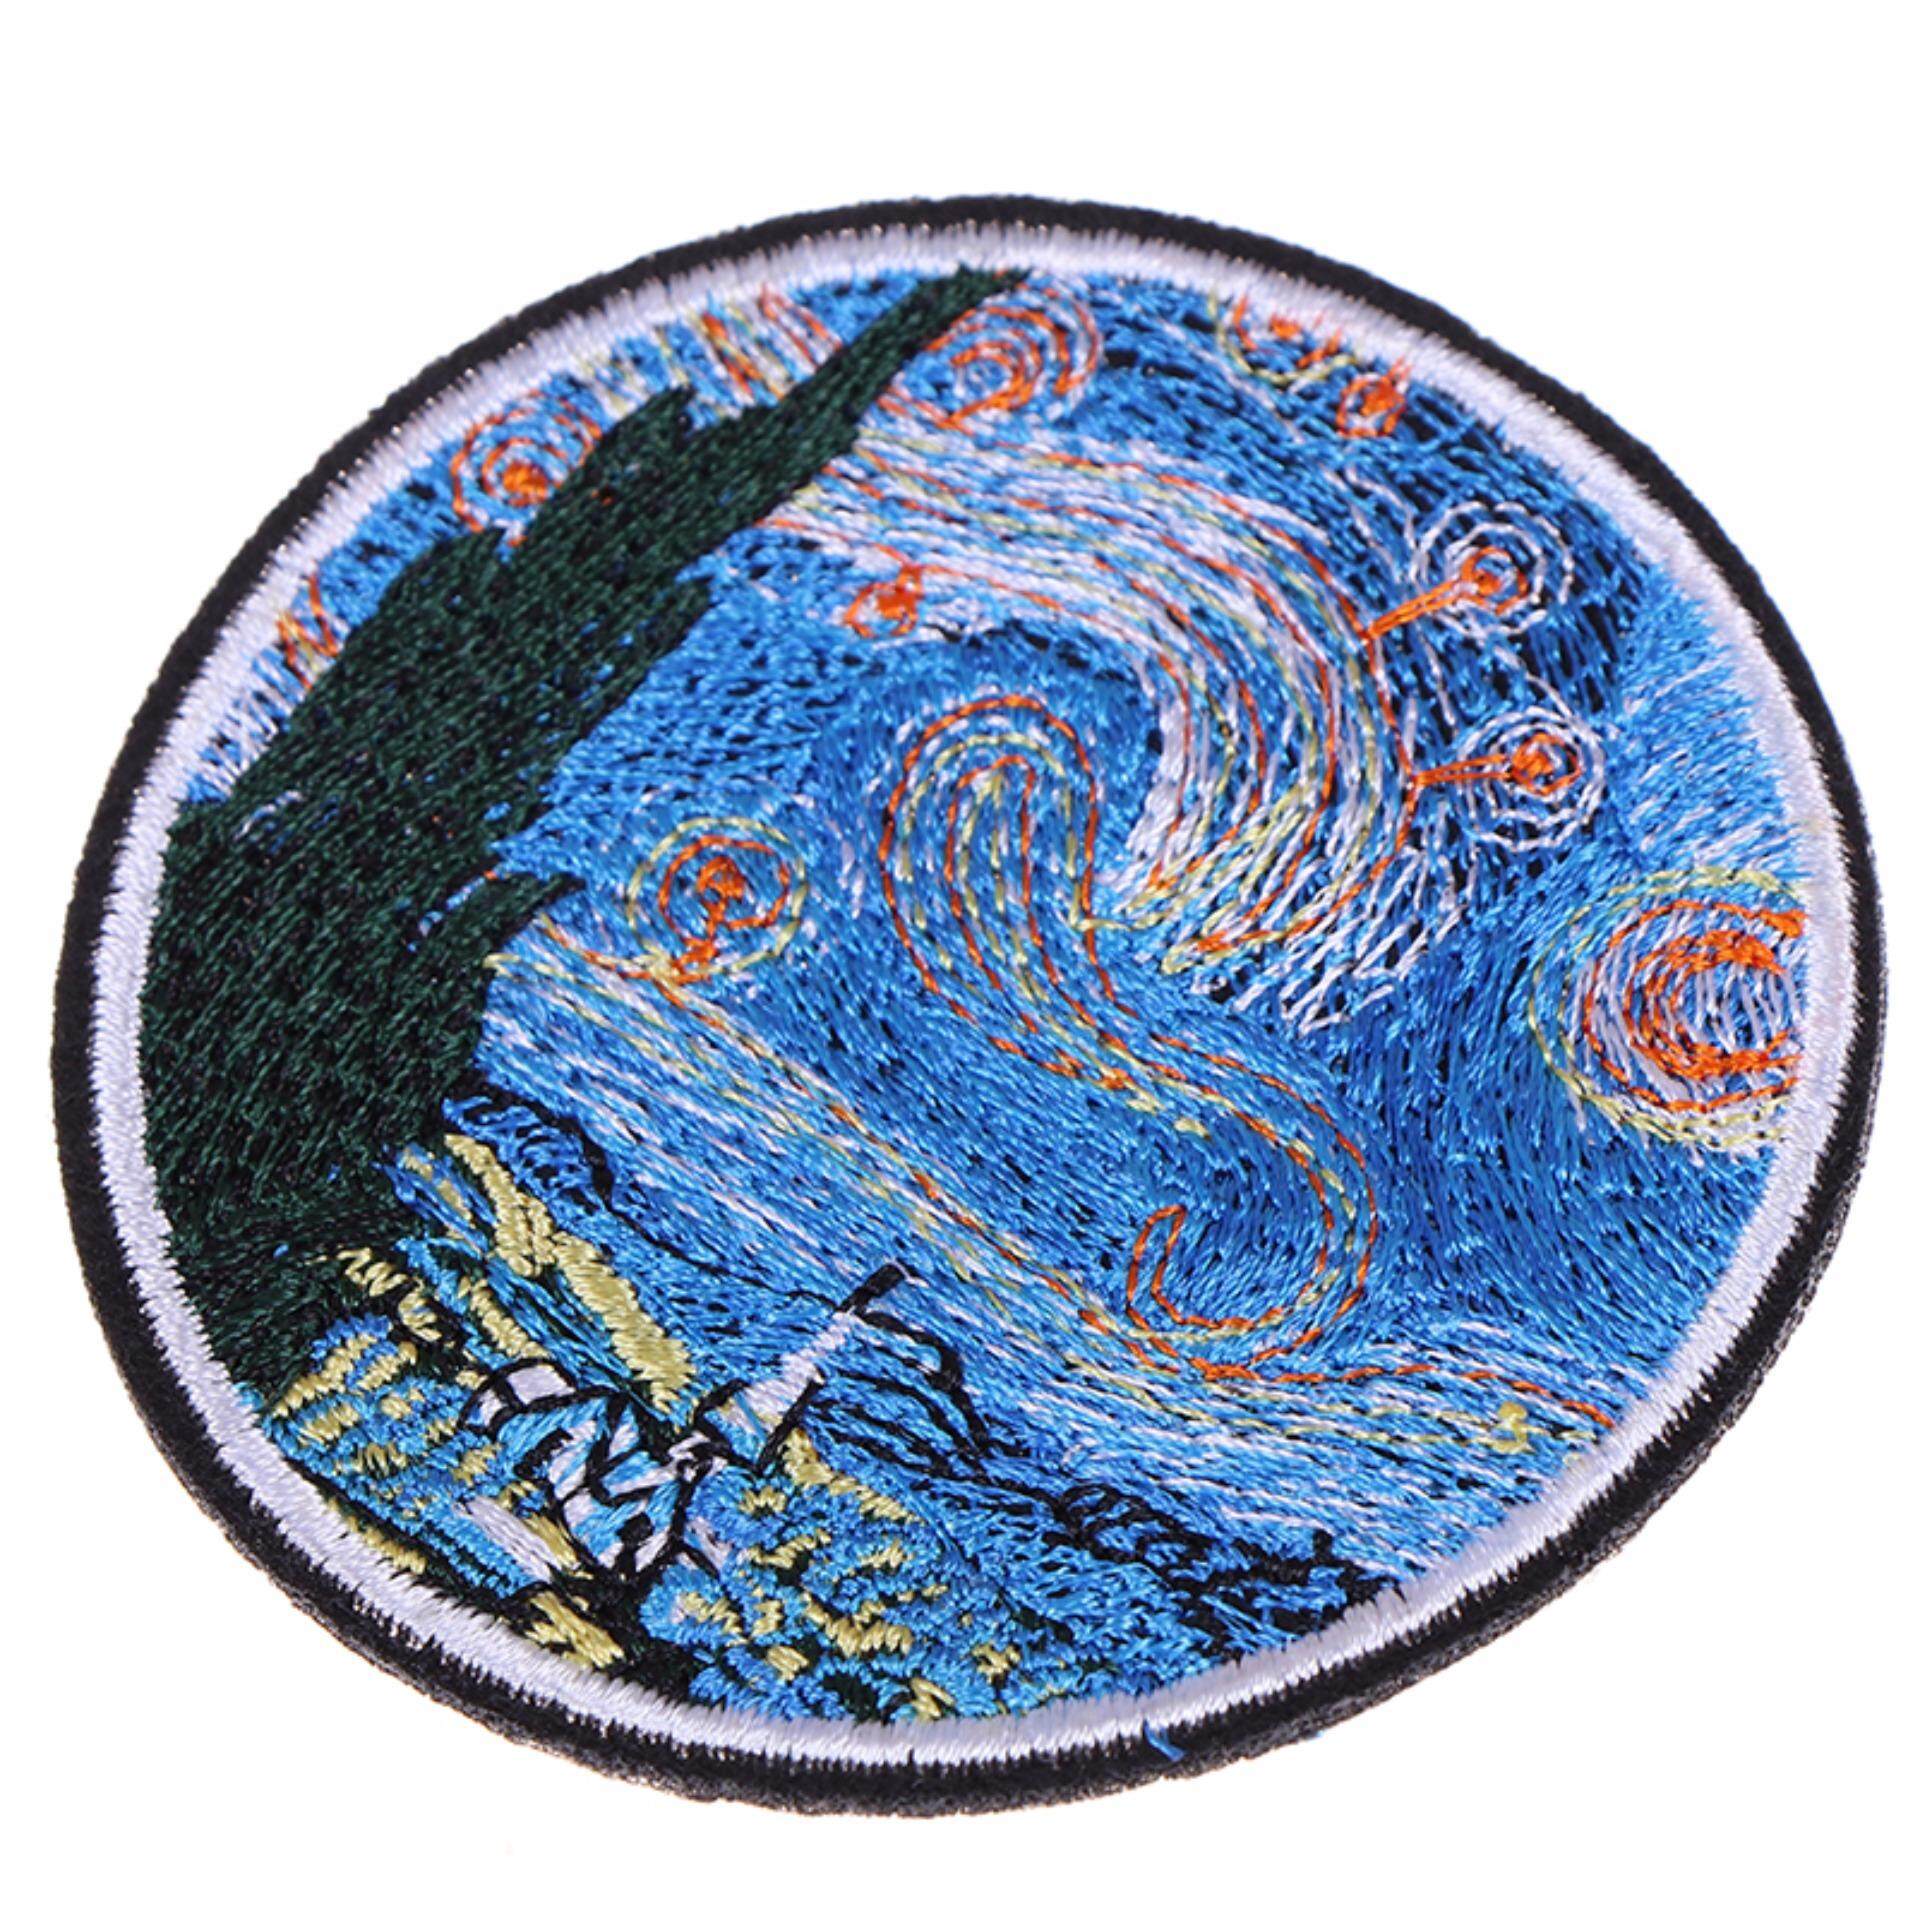 2pcs/lot Painting The Starry Night Embroidery Sew Iron On Patches DIY TEUSJKUS 